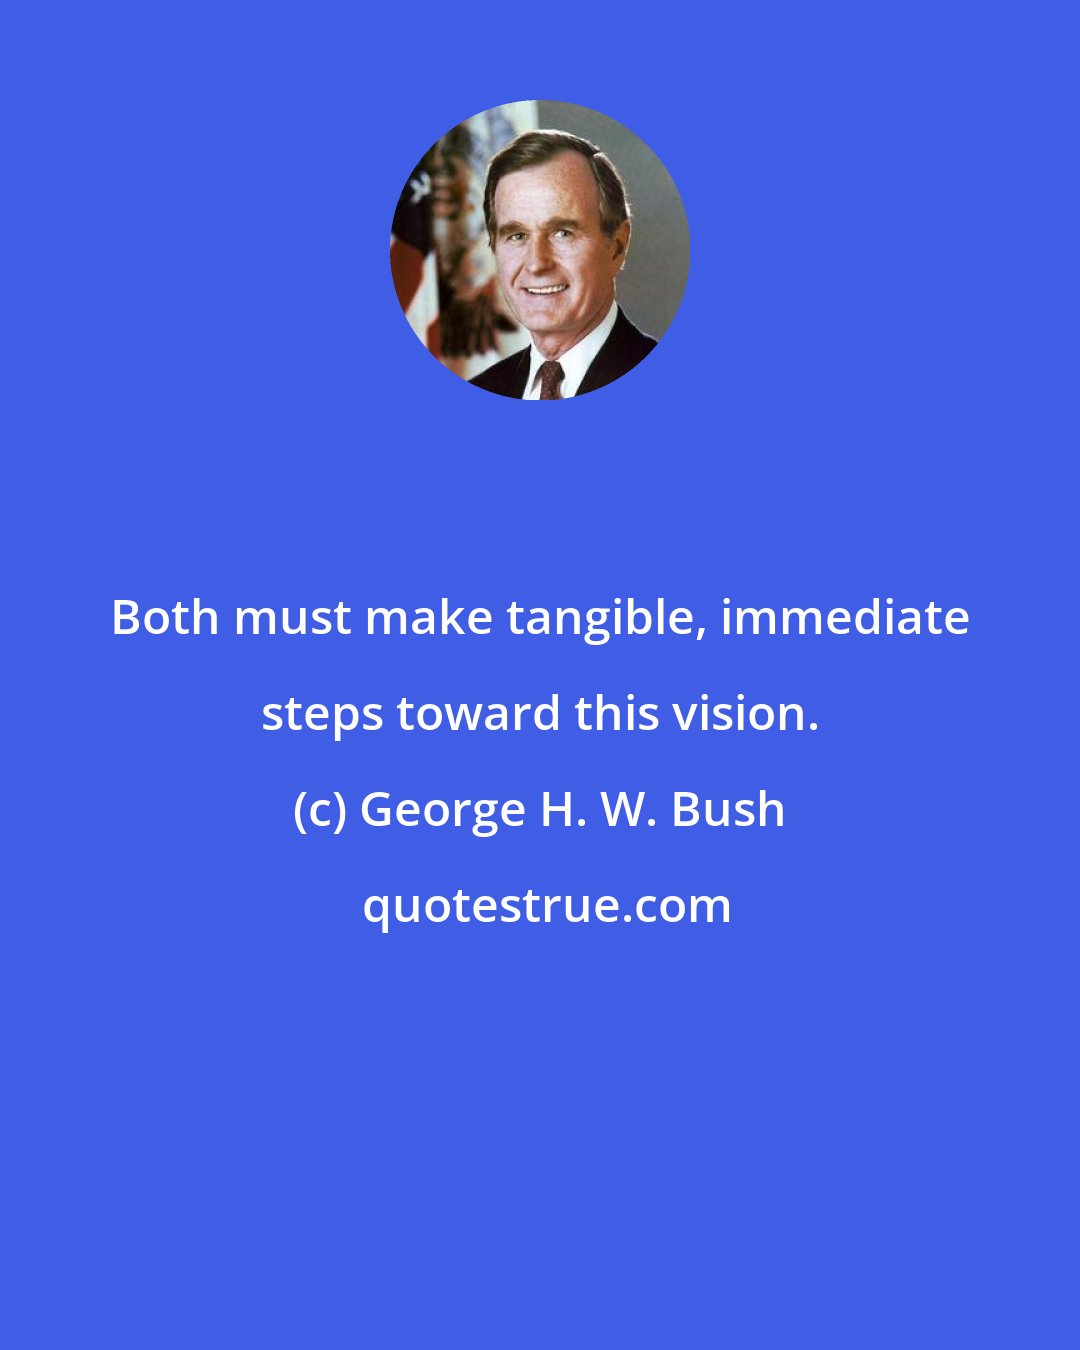 George H. W. Bush: Both must make tangible, immediate steps toward this vision.